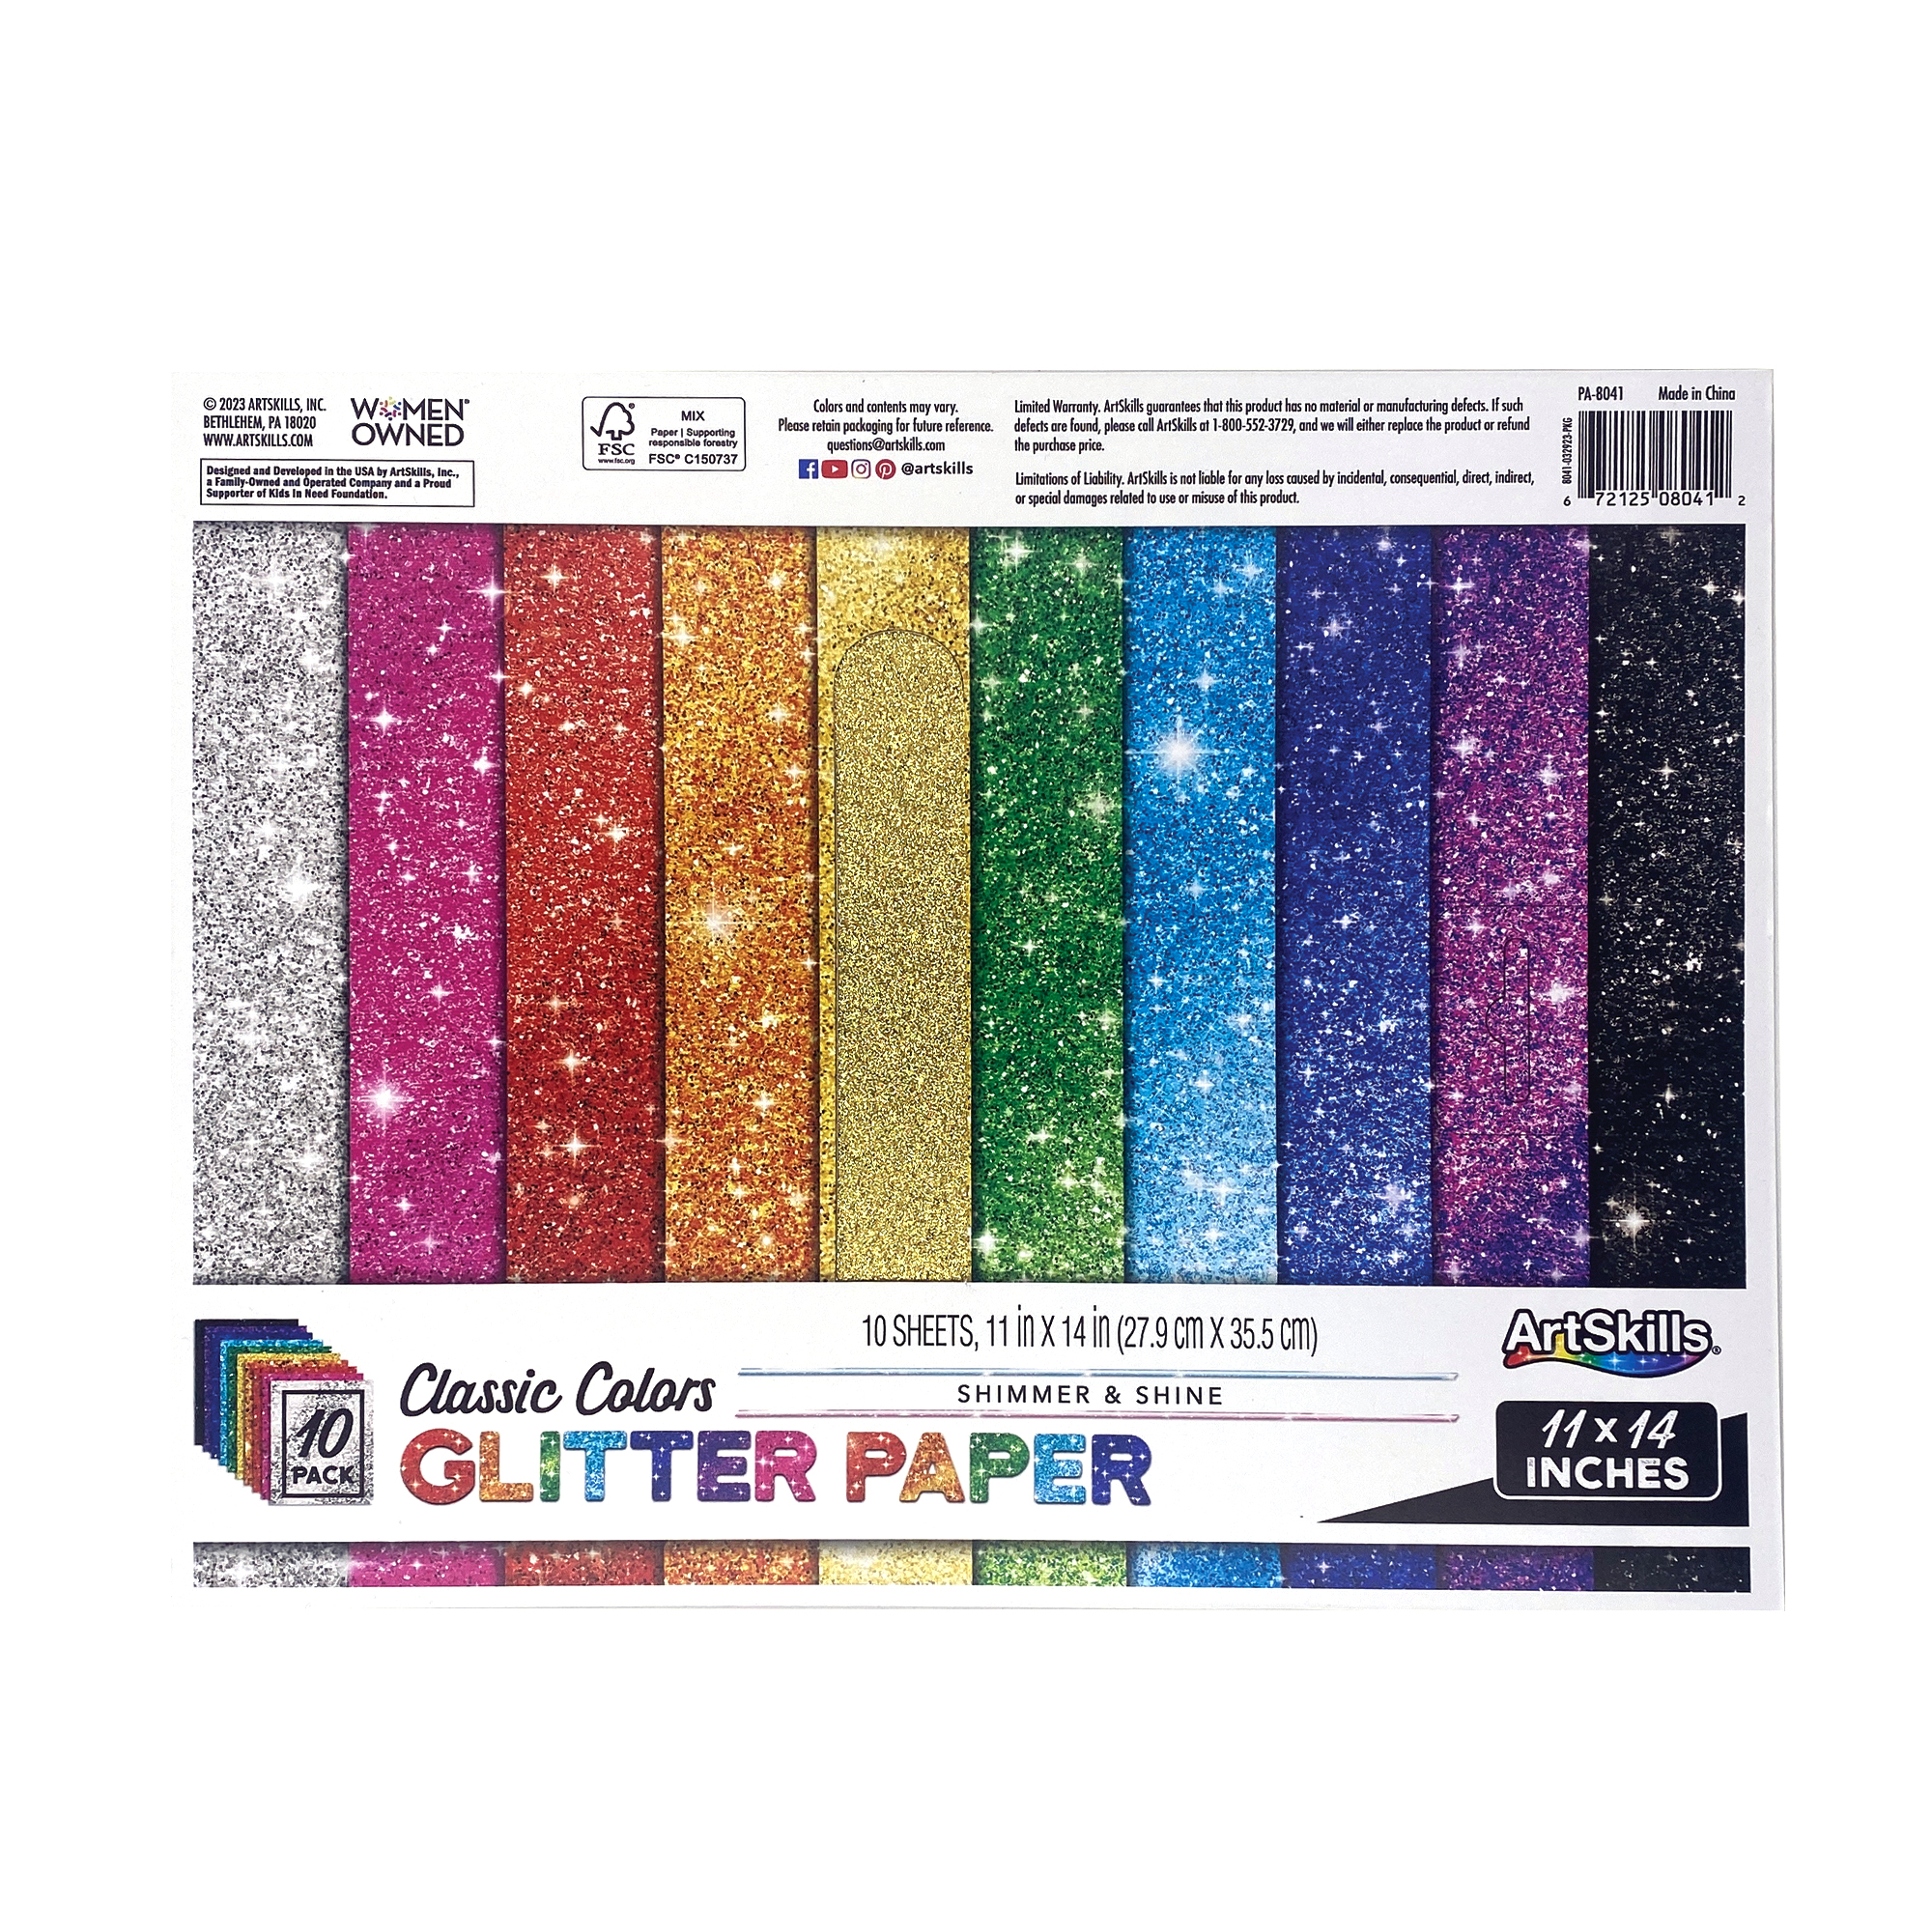 ArtSkills Glitter Paper for Arts and Crafts, Scrapbooking, 11" x 14", Assorted, 10 Pcs - image 2 of 6